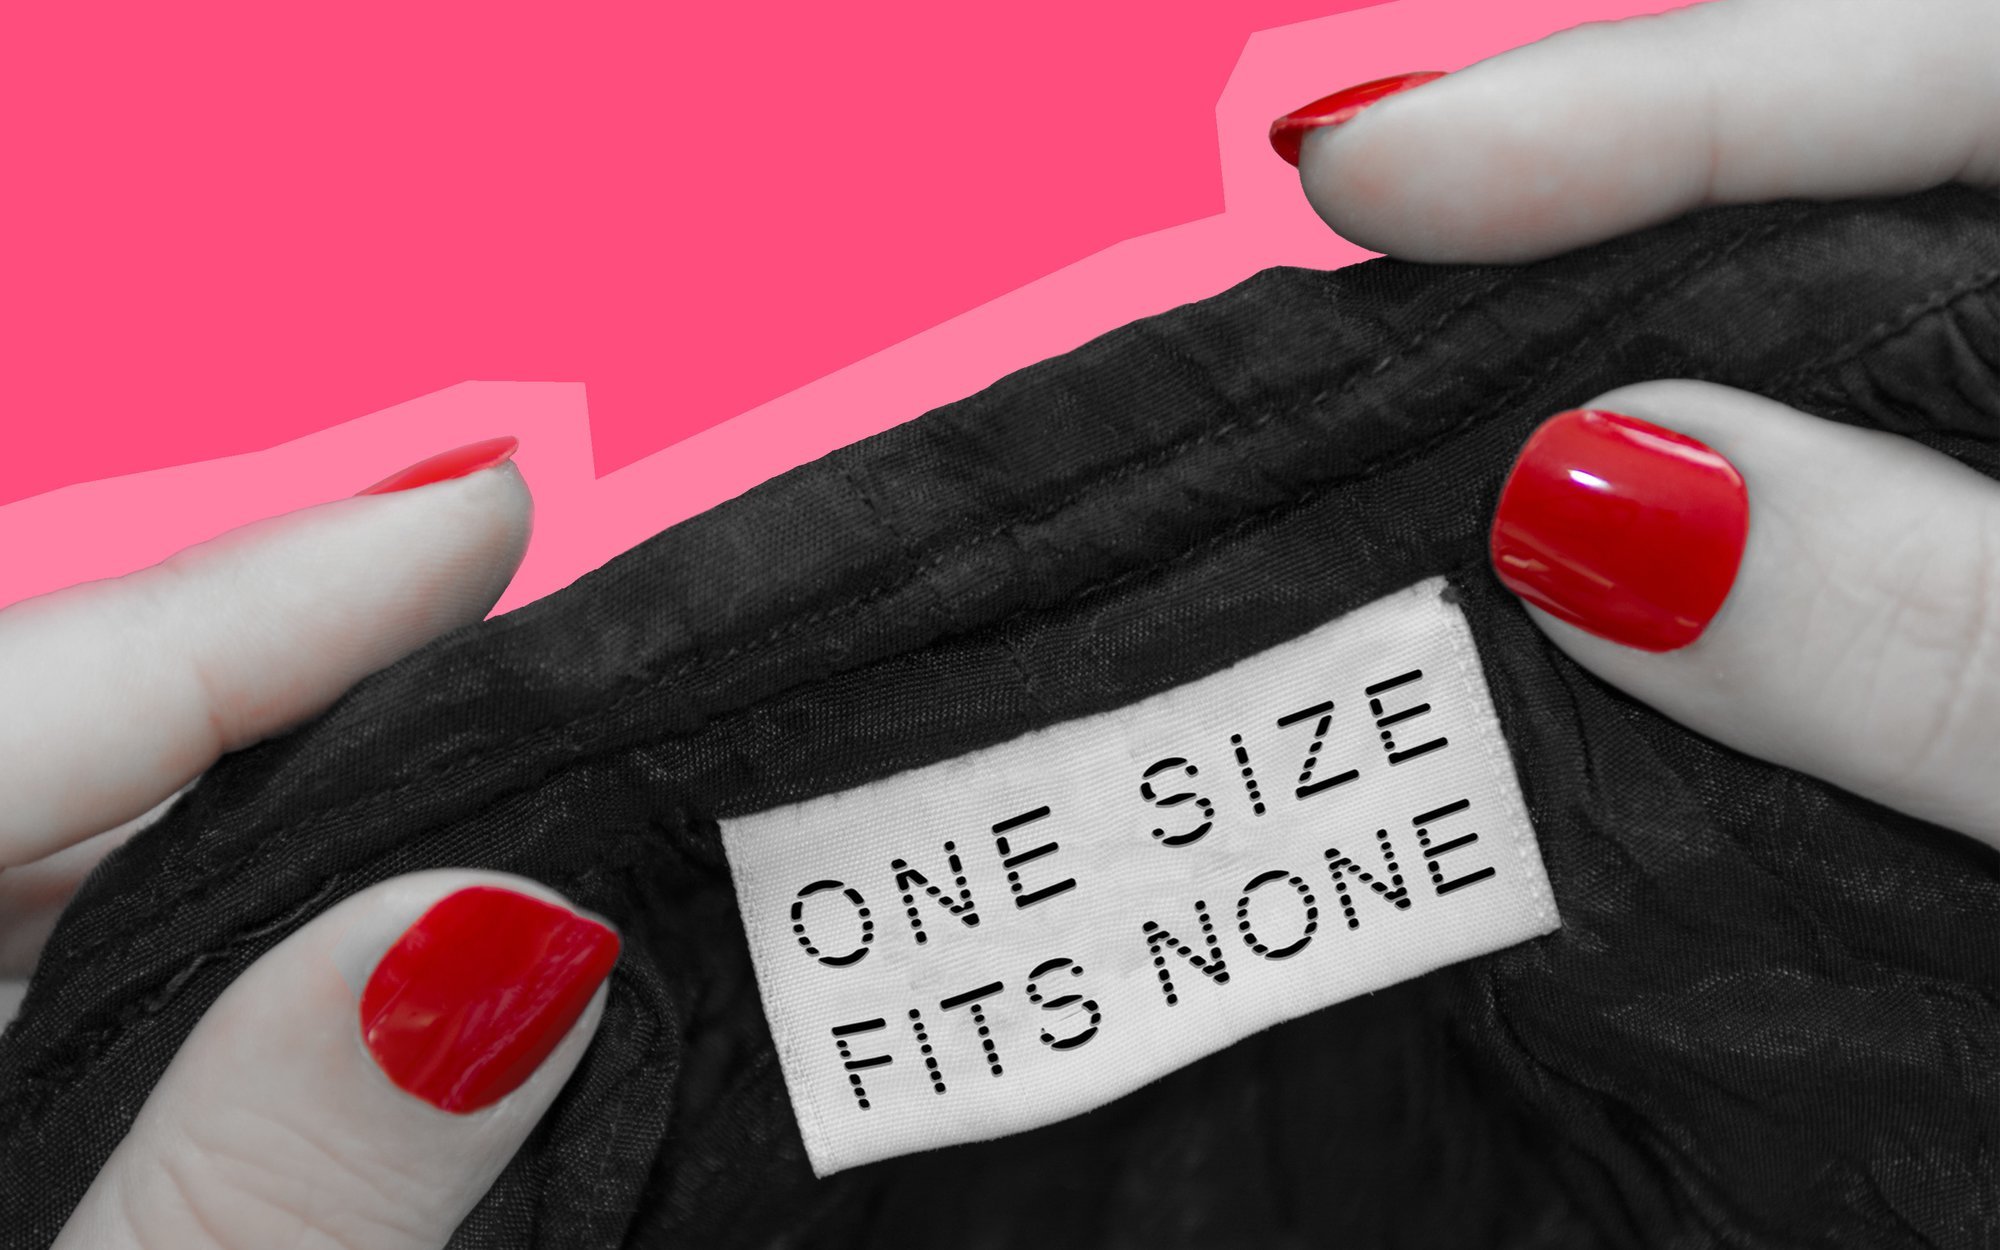 A black and white photo close up of a pair of hands with red nail polish showing the label from a garment that reads “One size fits none”.